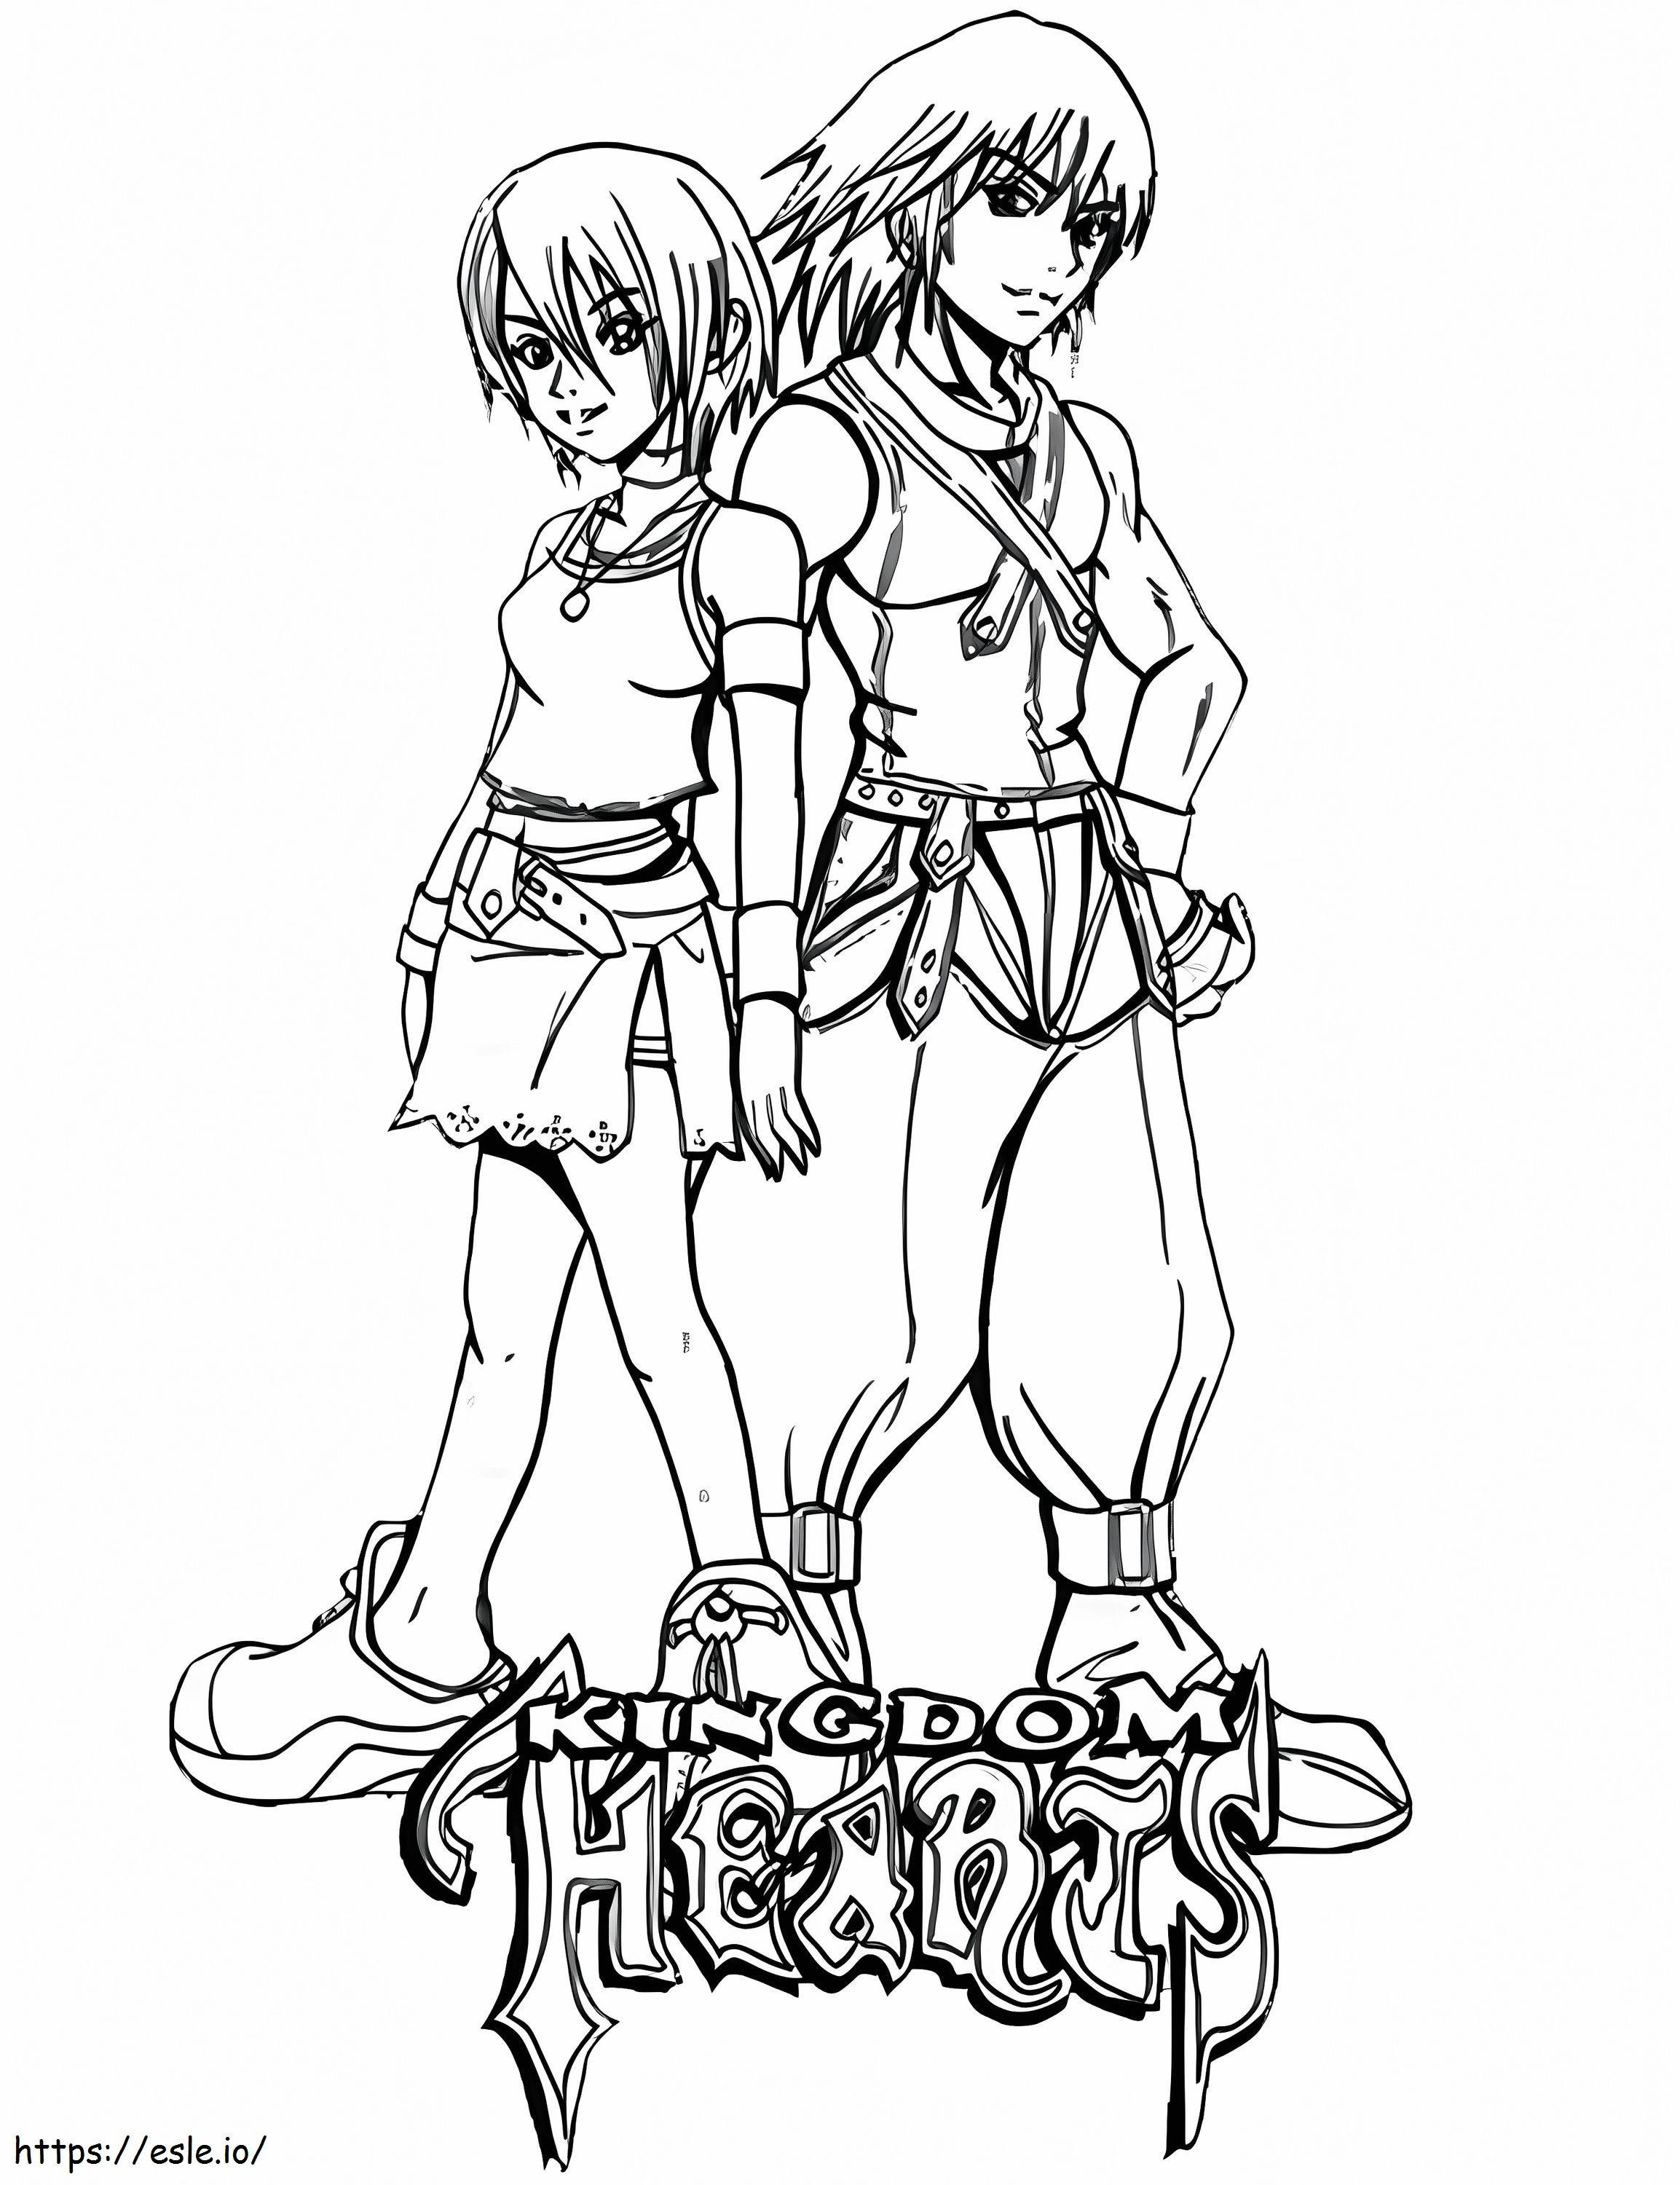 Kingdom Hearts Game coloring page